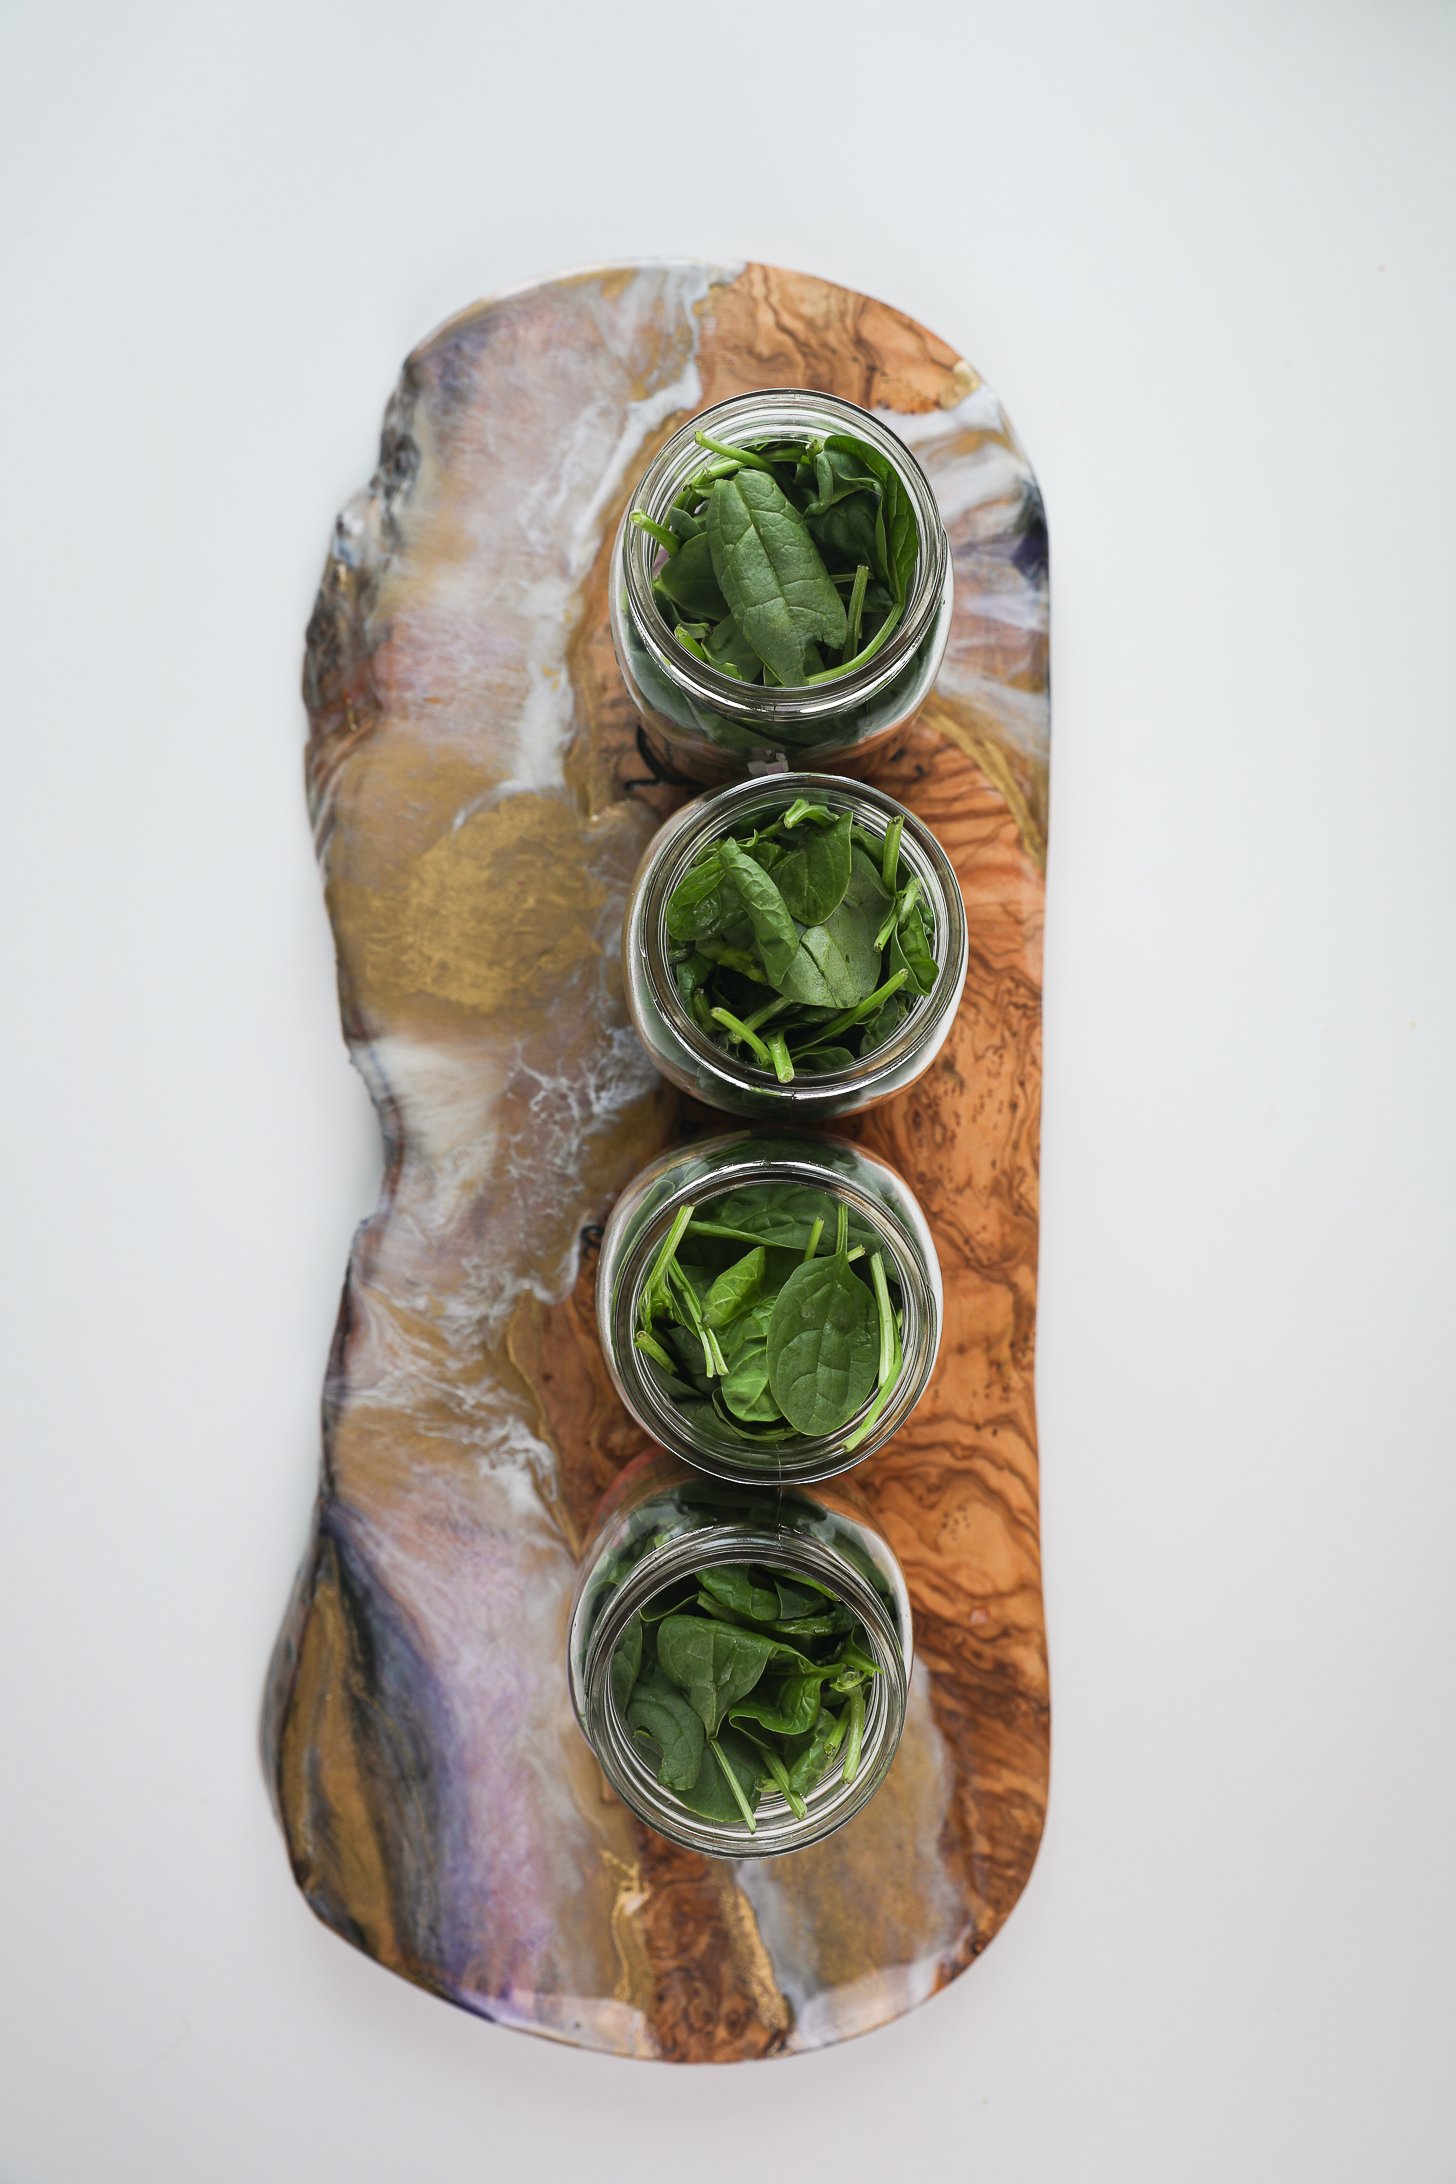 Four mason jars lined up and filled to the rim with spinach placed on a long wooden board.